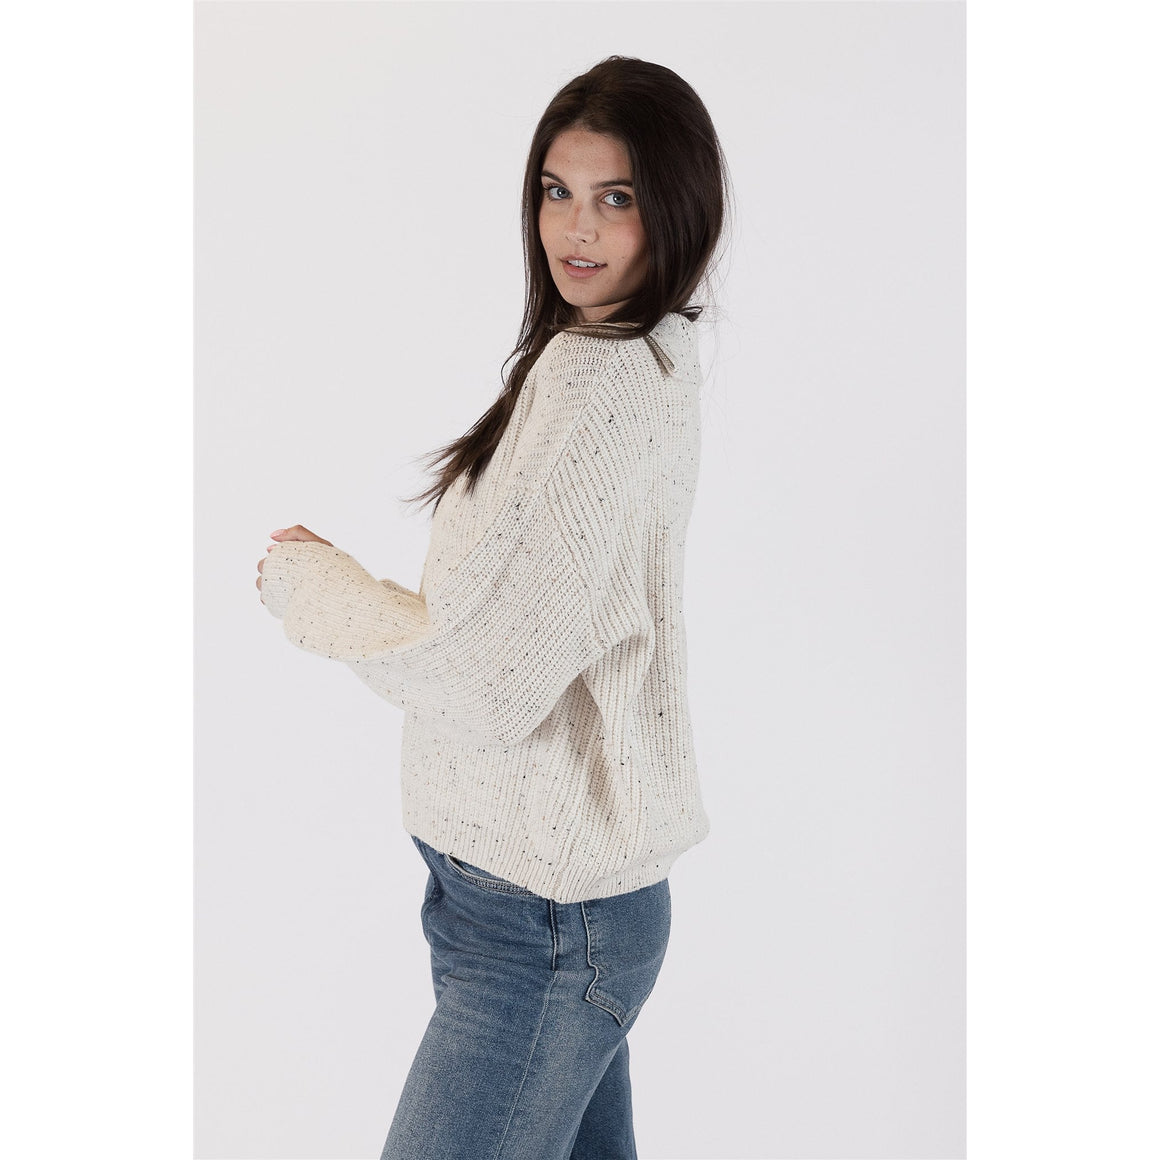 CHASE SWEATER-LADIES SWEATERS & KNITS-LYLA & LUXE-JB Evans Fashions & Footwear